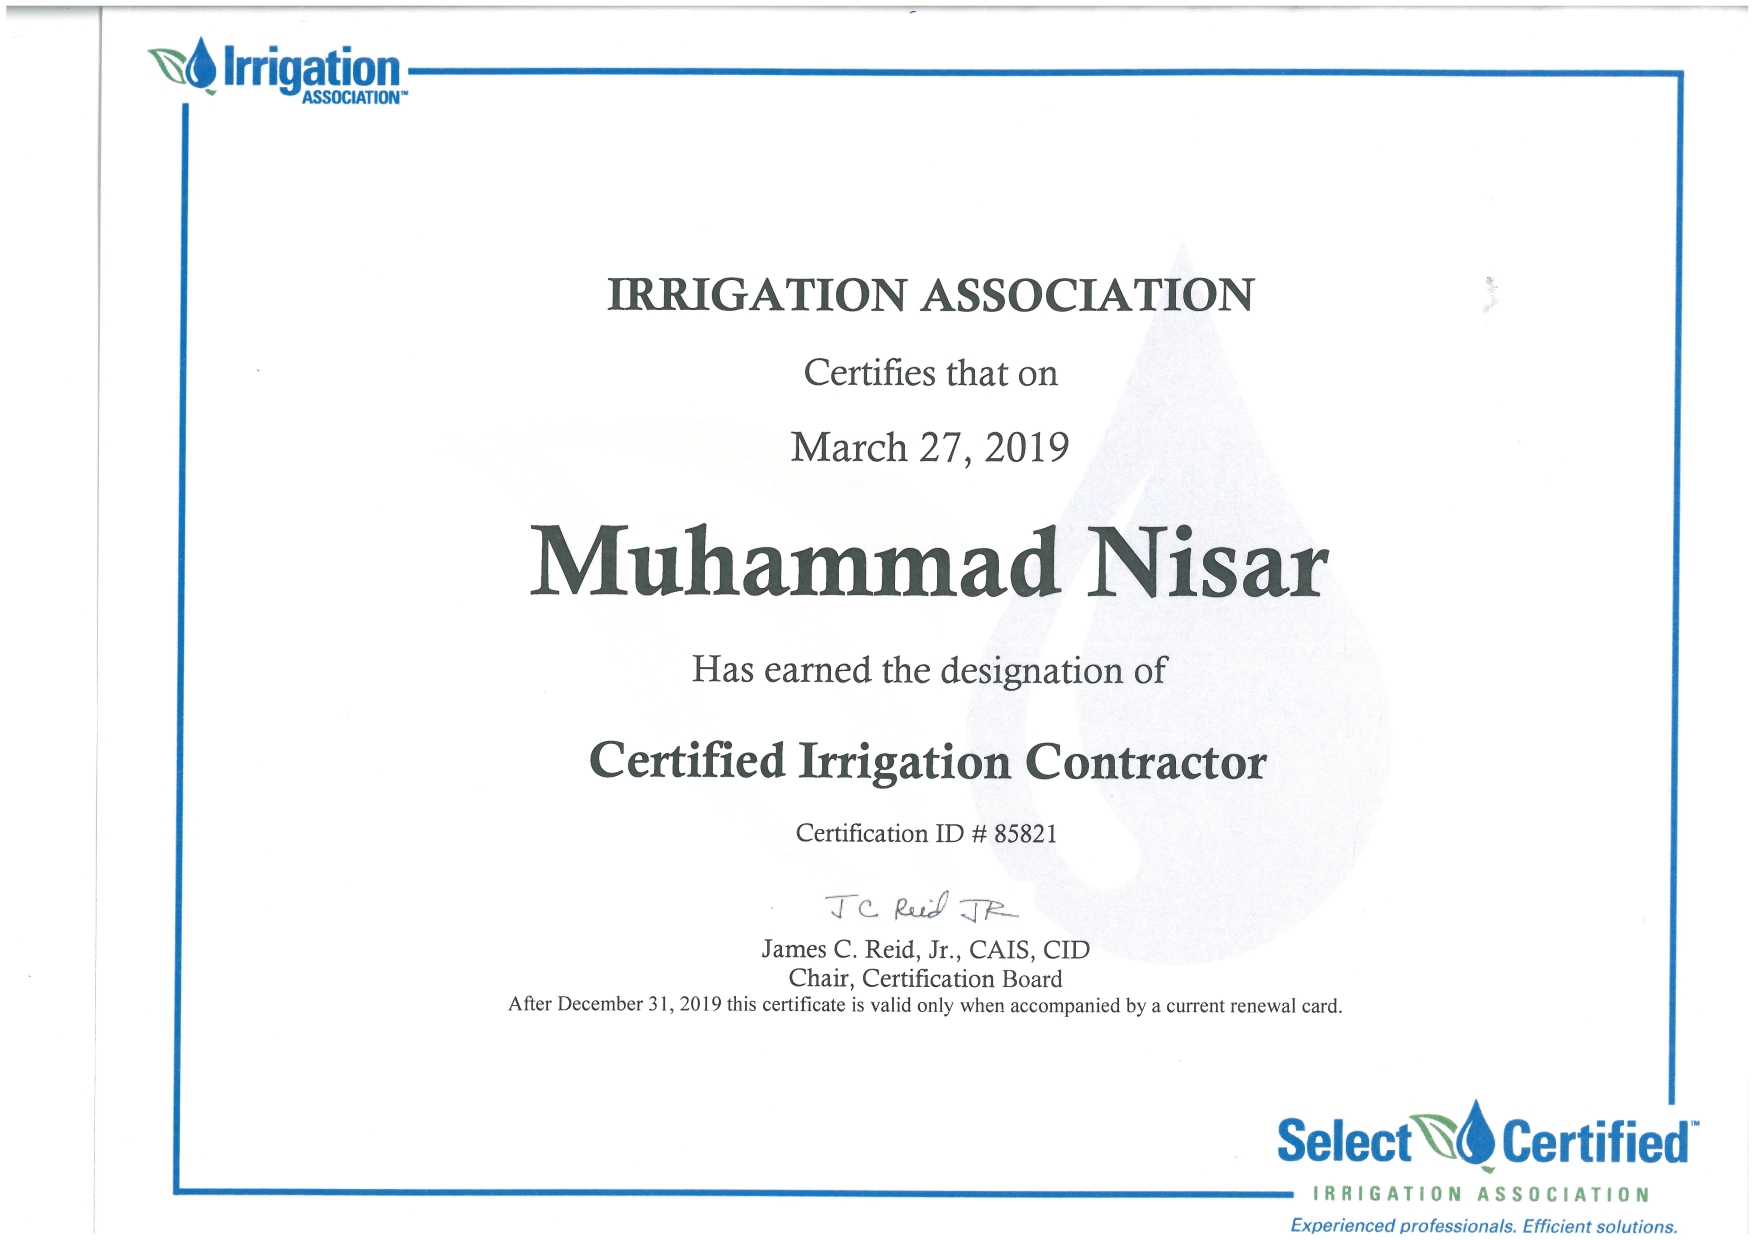 IRRIGATION ASSOCIATION

Certifies that on

March 27, 2019

Muhammad Nisar

Has earned the designation of

Certified Irrigation Contractor

Certification ID # 85821

Je ud TR
James C. Reid, Jr., CAIS, CID

Chair, Certification Board
After December 31, 2019 this certificate 1s valid only when accompanied by a current renewal card.

Select Certified

IRRIGATION ASSOCIATION

Experienced professionals. Efficient solutions.